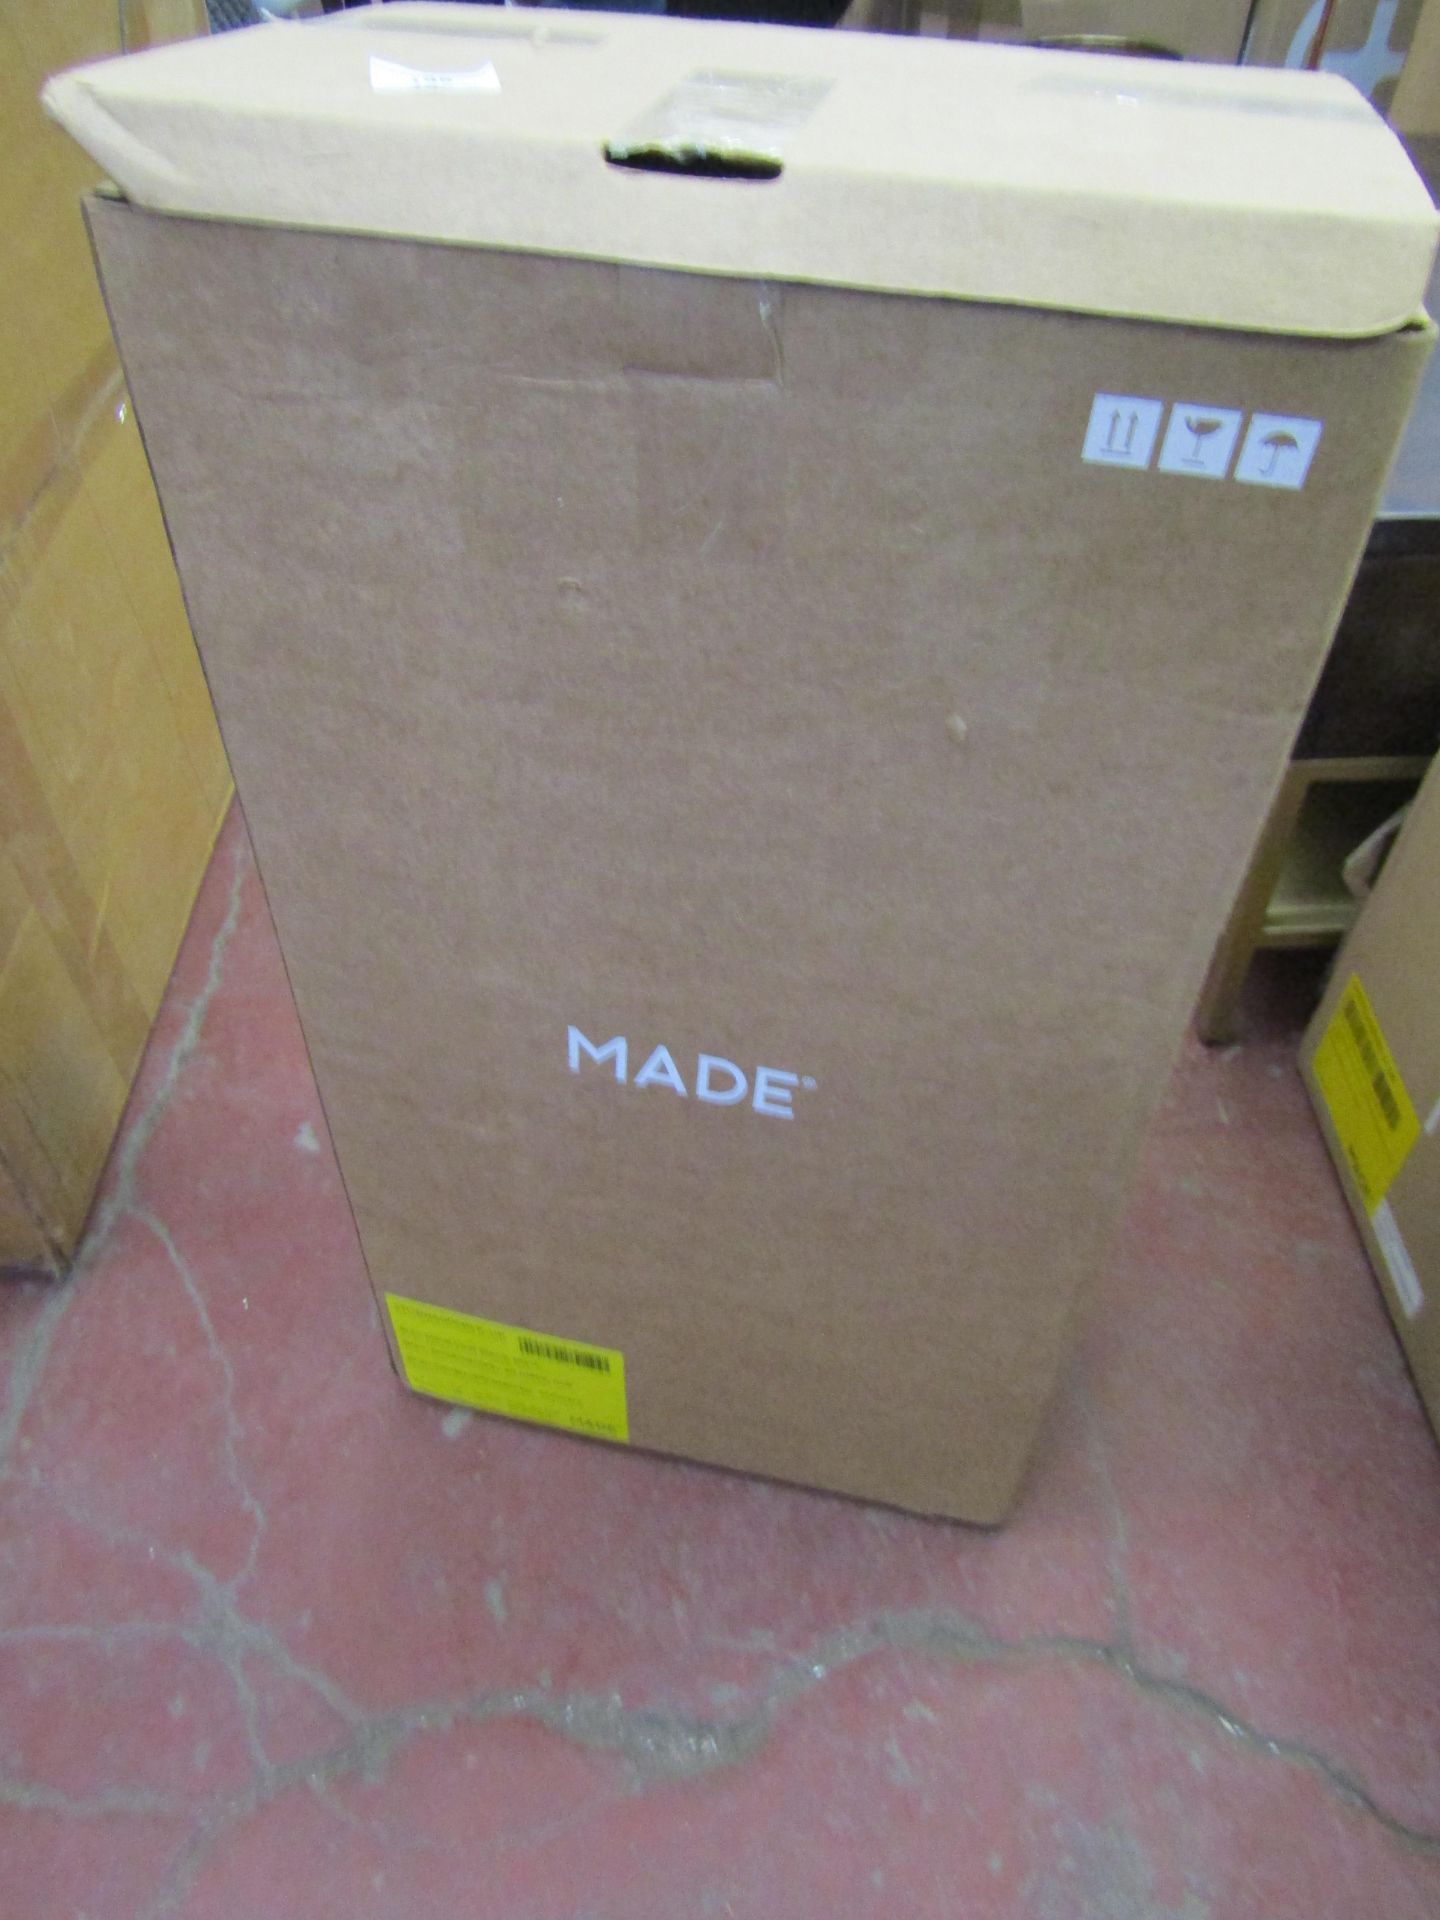 | 1x | MADE.COM BNRAN METAL COAT STAND | UNCHECKED AND BOXED | RRP CIRCA £69 |